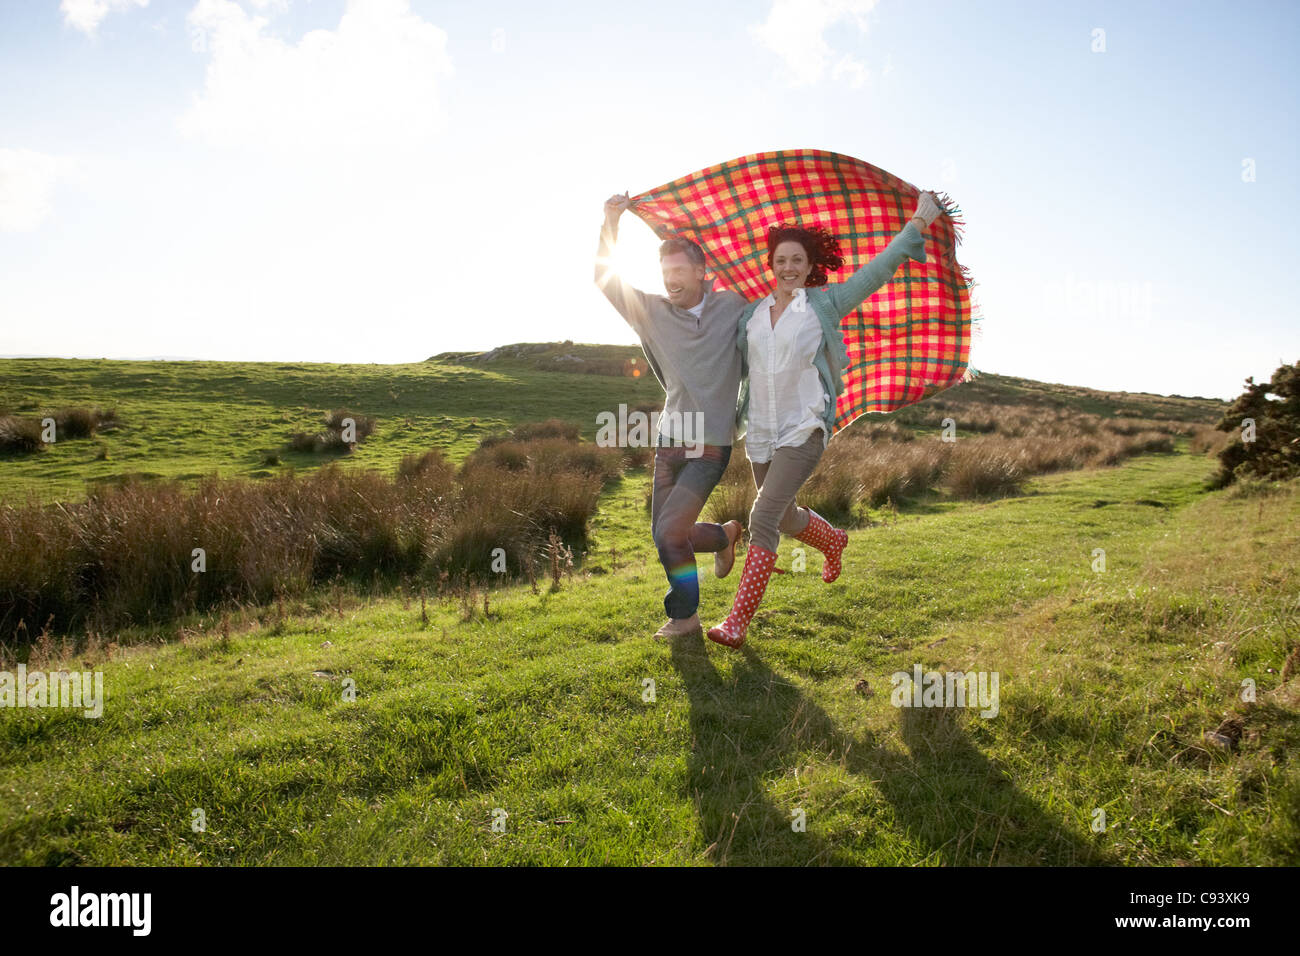 Couple in countryside Stock Photo